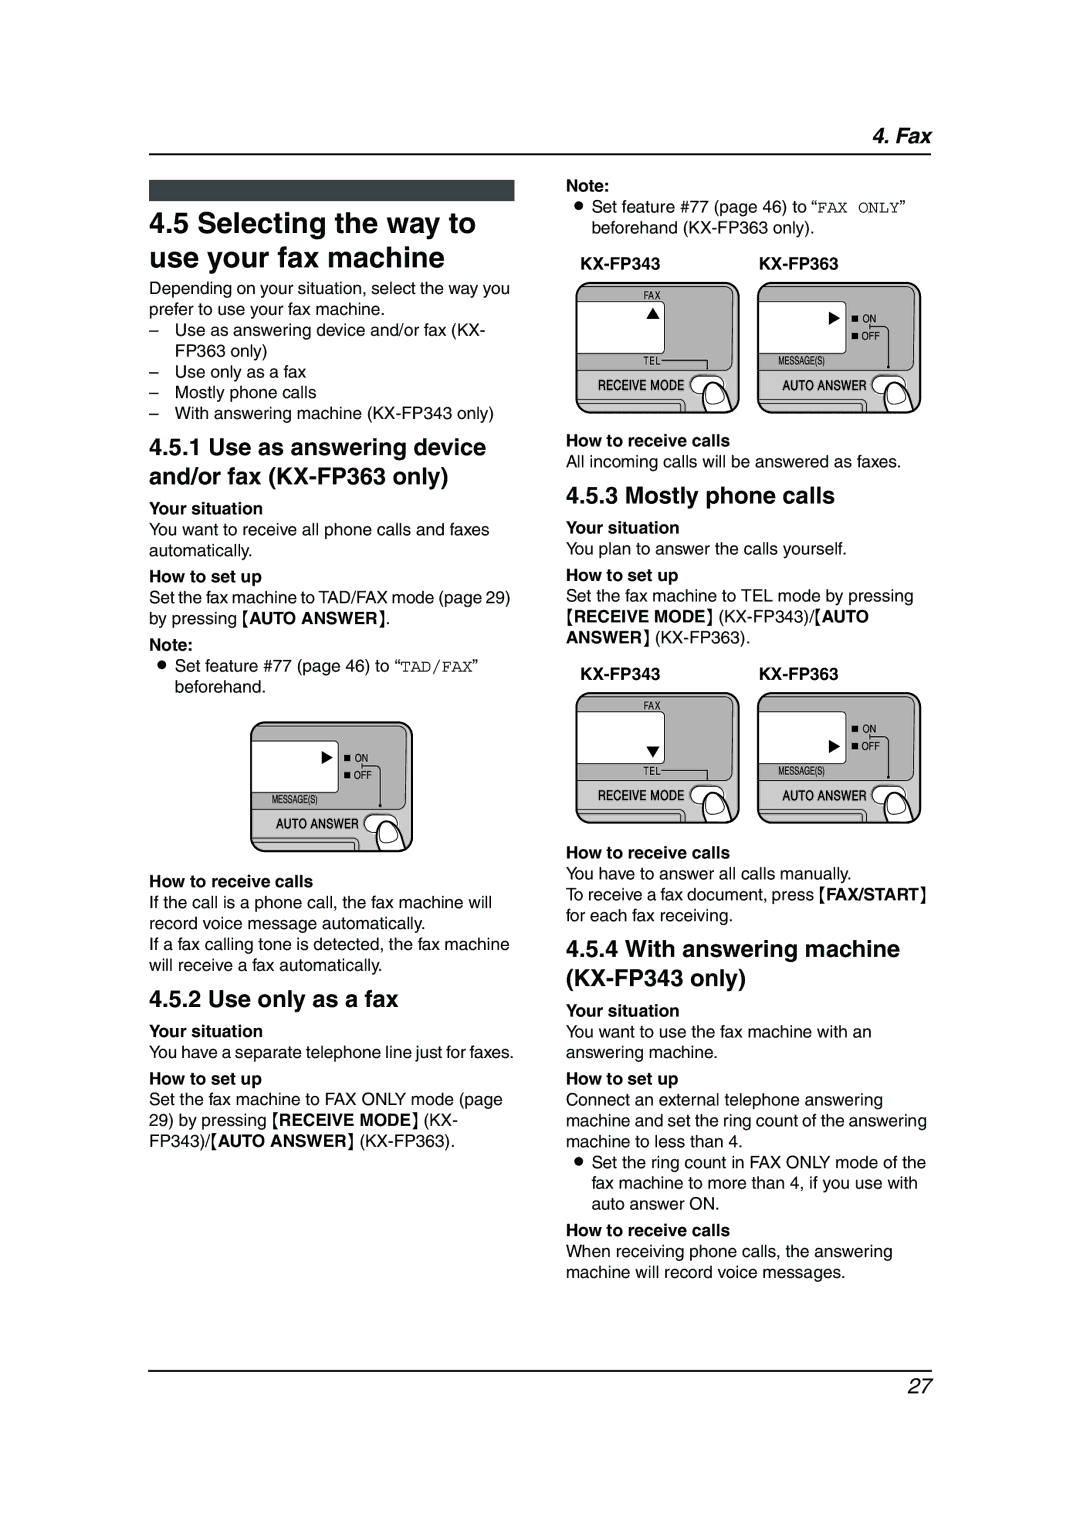 Panasonic KX-FP343HK manual Selecting the way to use your fax machine, Use as answering device and/or fax KX-FP363 only 